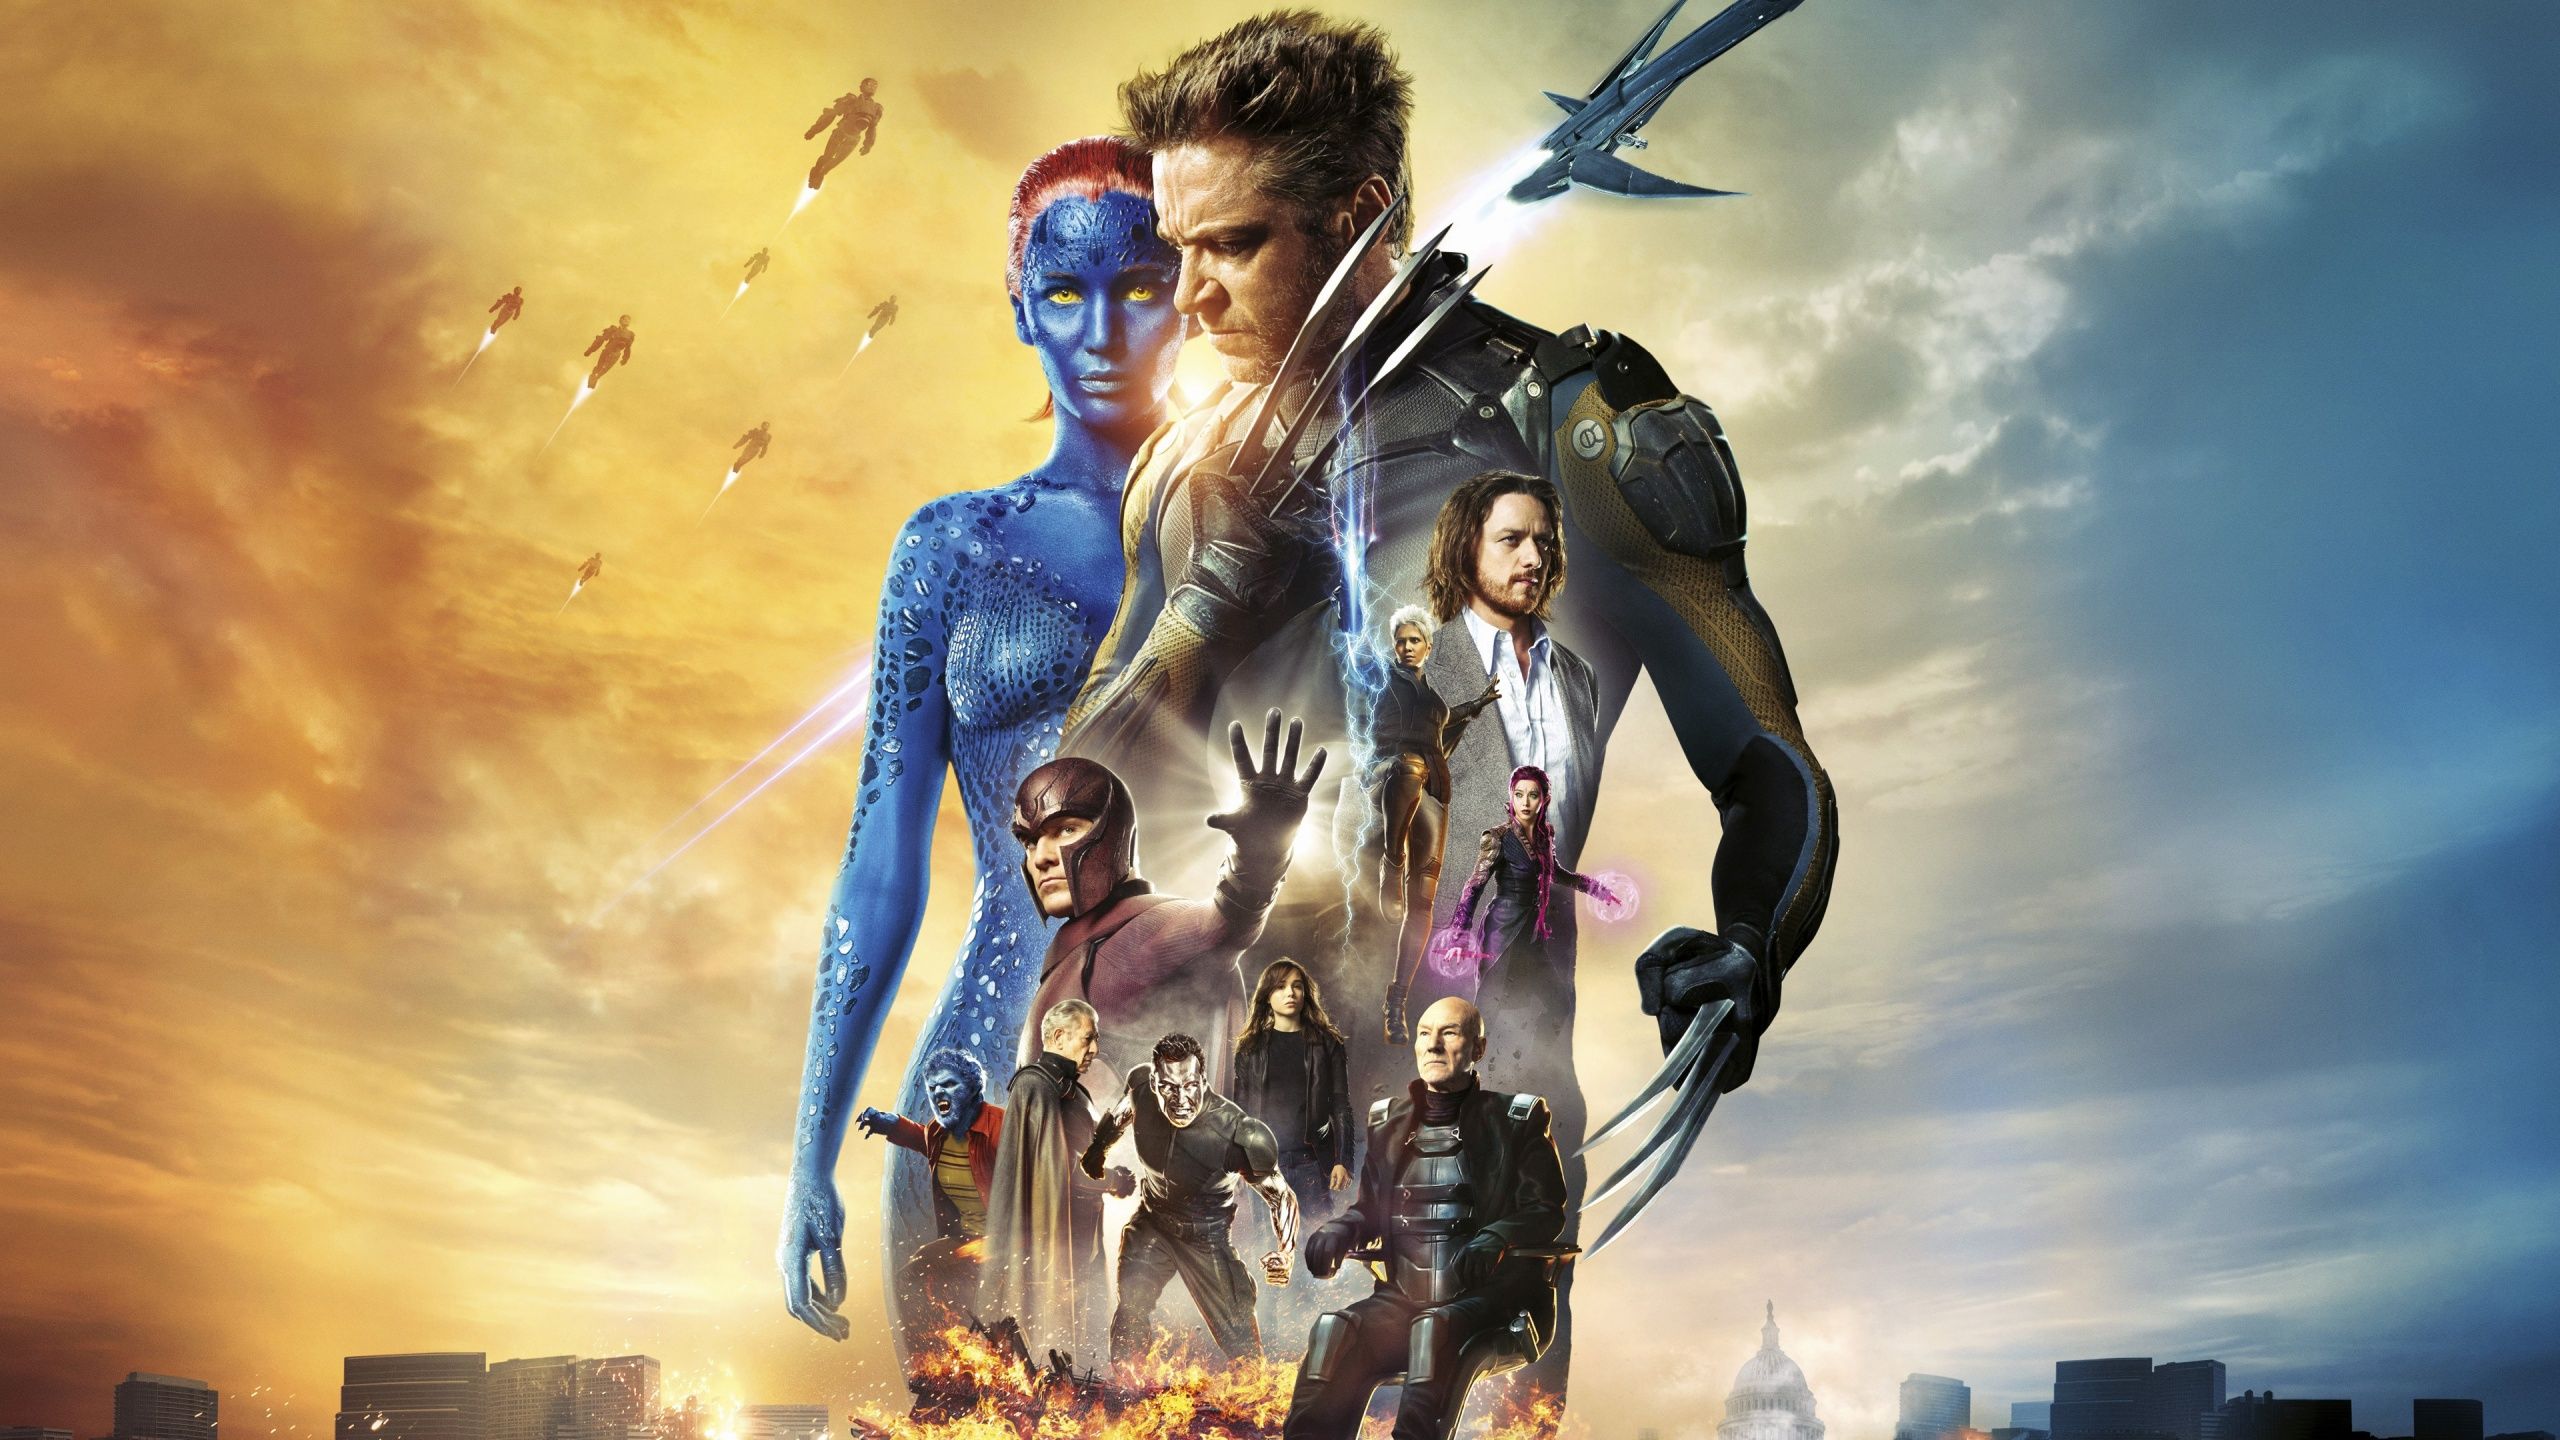 X Men Days of Future Past Movie Wallpaper in jpg format for free download